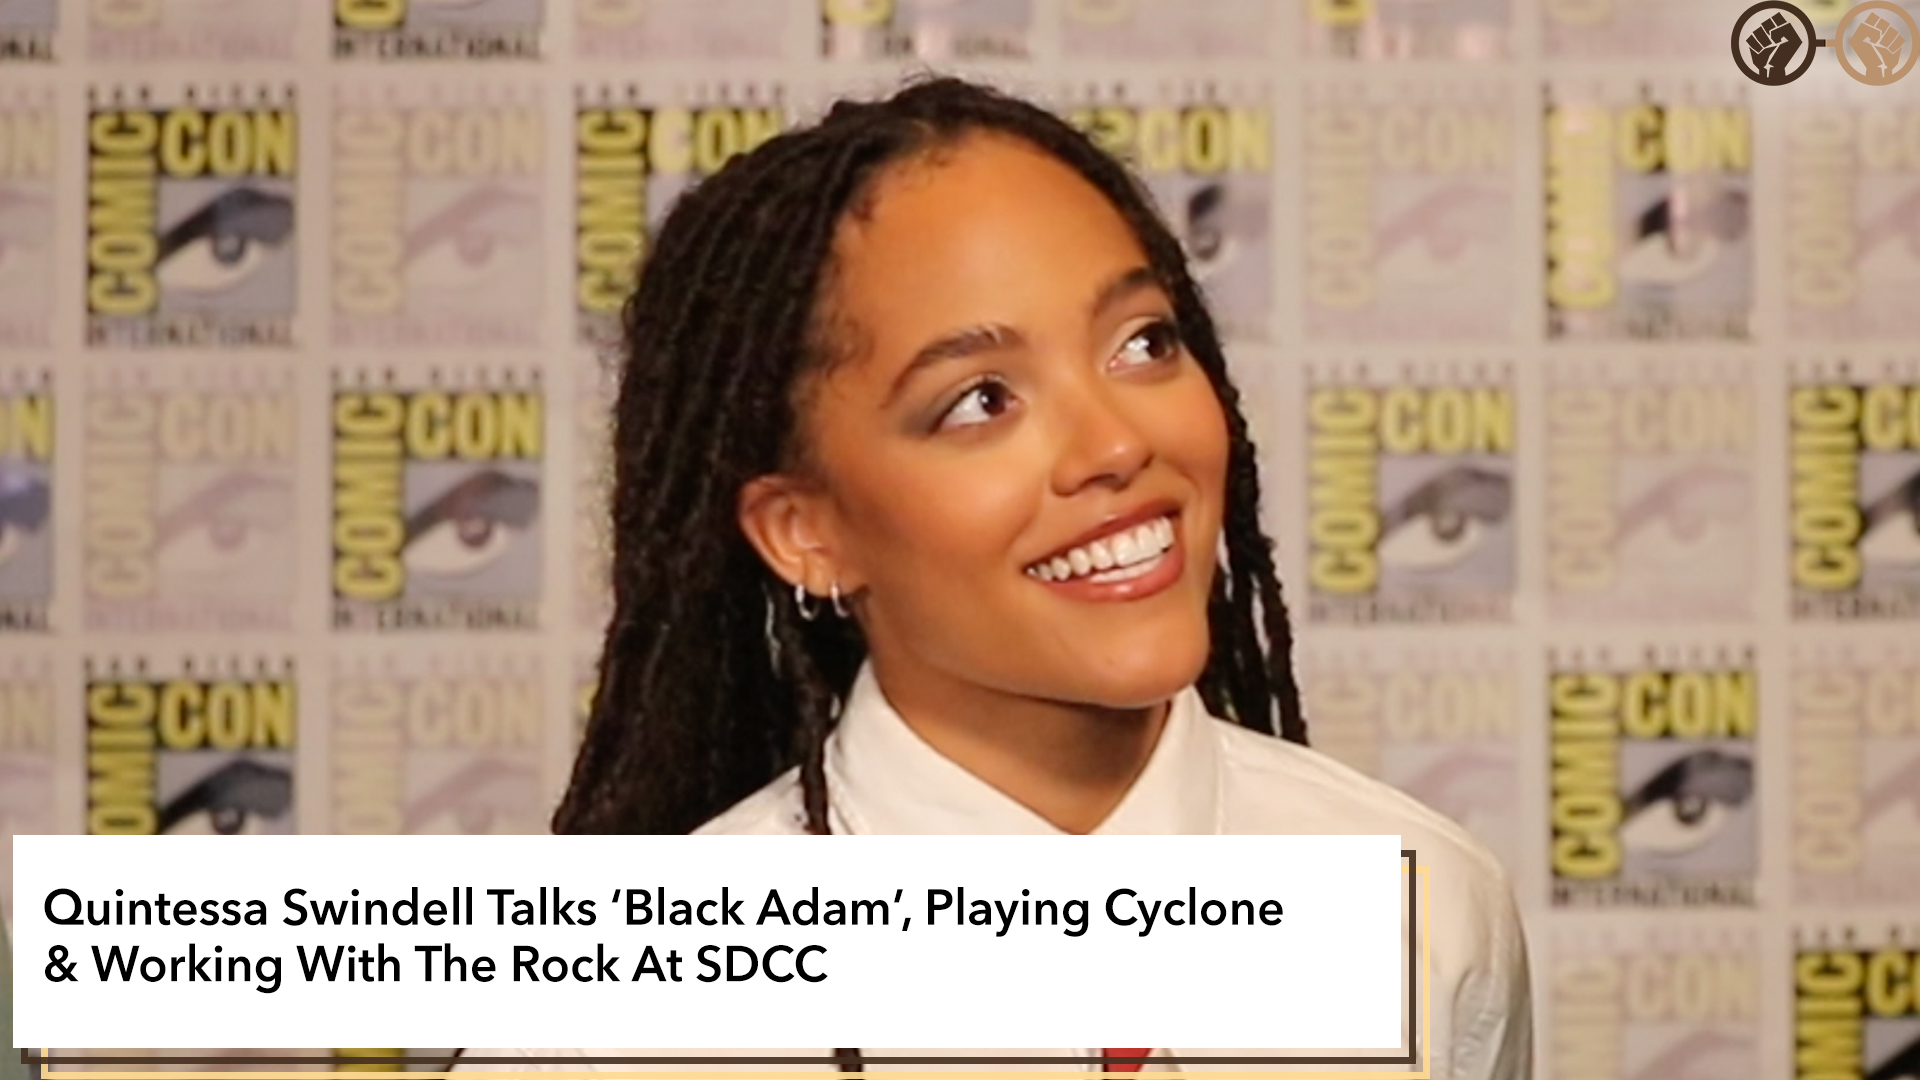 Interview: Quintessa Swindell Talks ‘Black Adam’, Playing Cyclone & Working With The Rock At SDCC